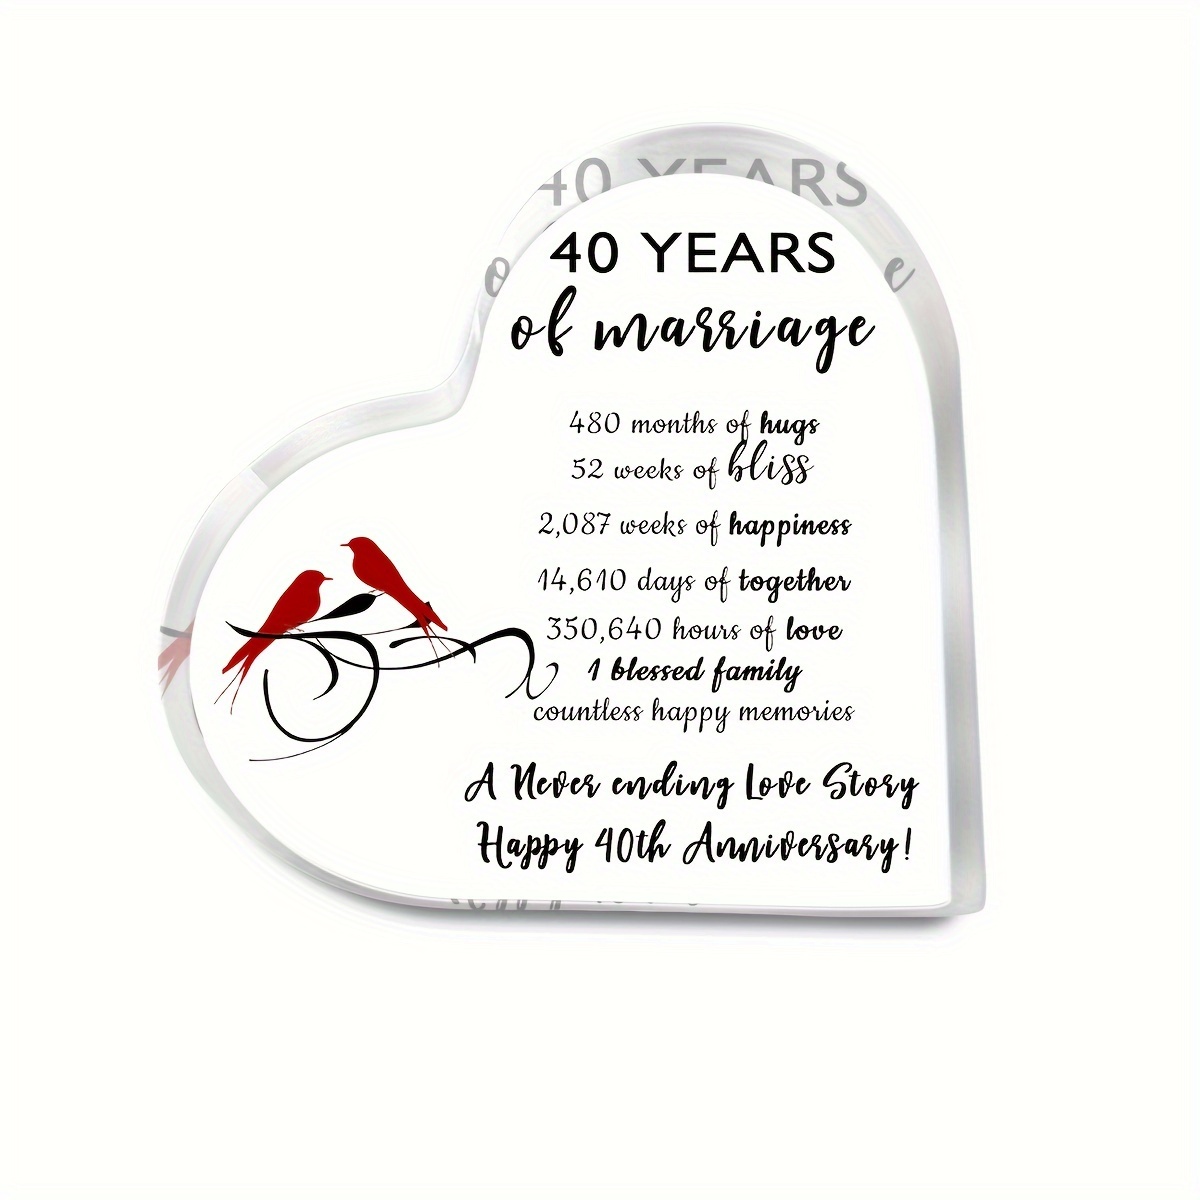 Marriage Anniversary Wedding Gifts for Women, Happy 1st Anniversary Wedding  Gifts for Husband Wife Friends, 1 Year of Marriage Gift Keepsake Heart